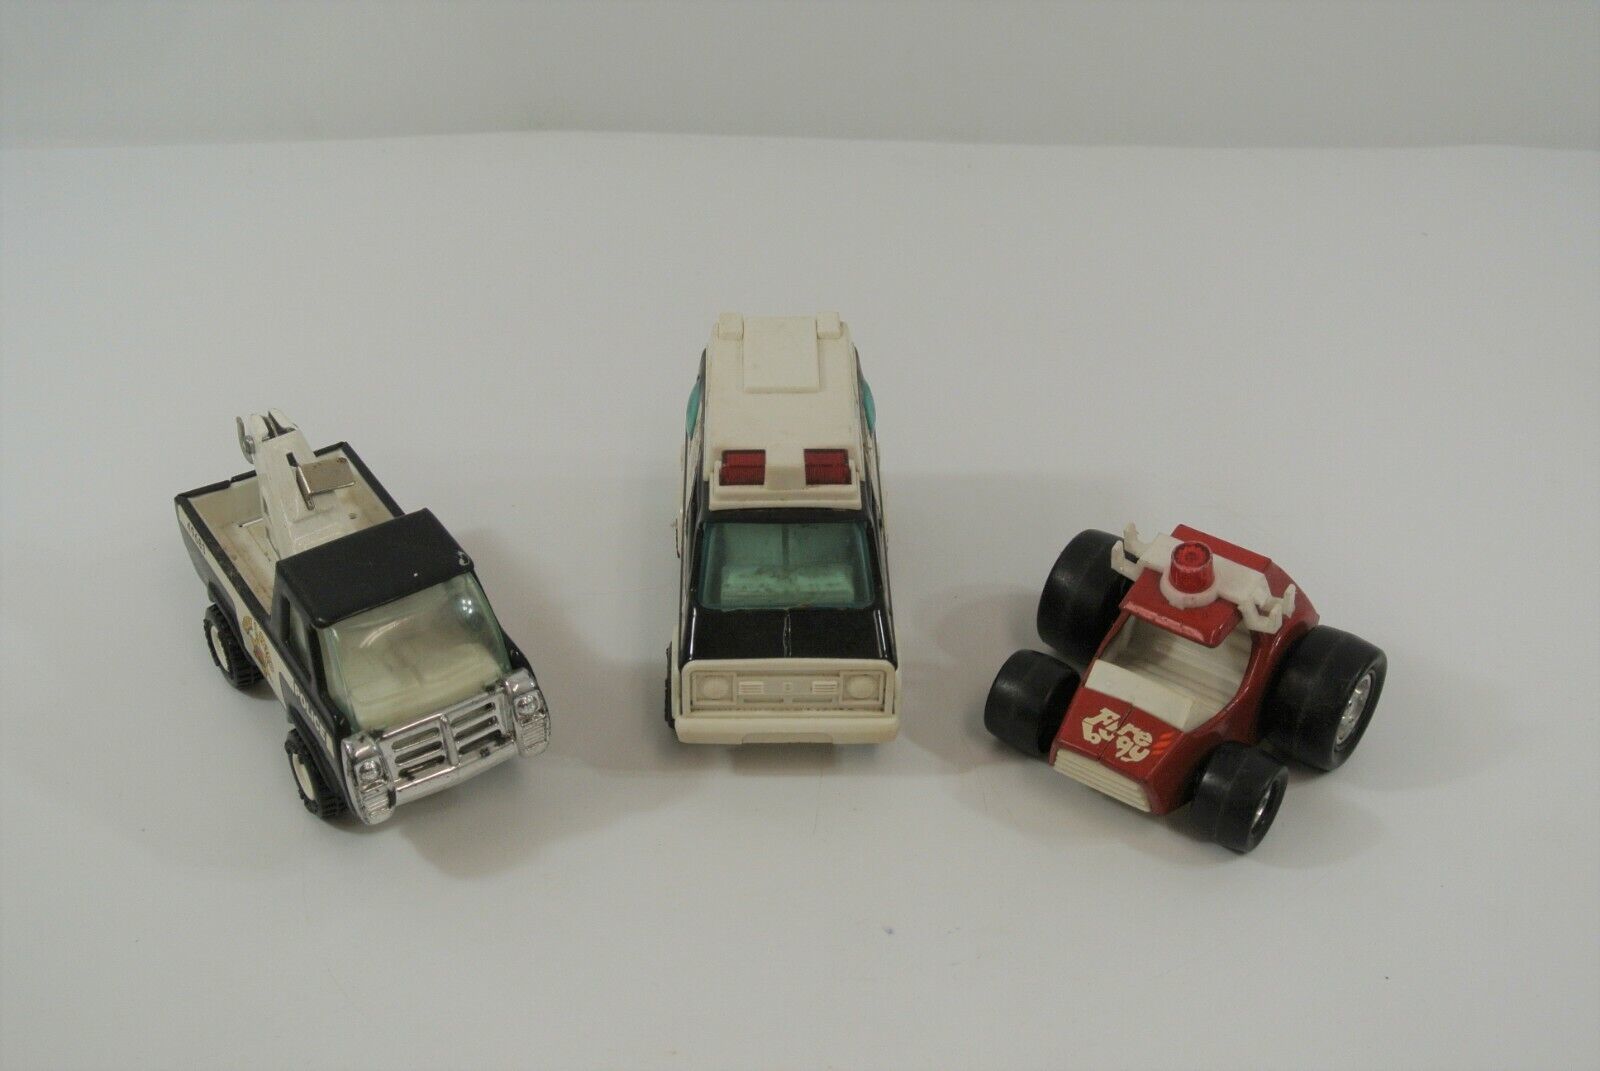 Buddy L Lot of 3 Toy Vehicles Police Patrol Tow 49683 Fire Bugy Japan VTG - $33.85